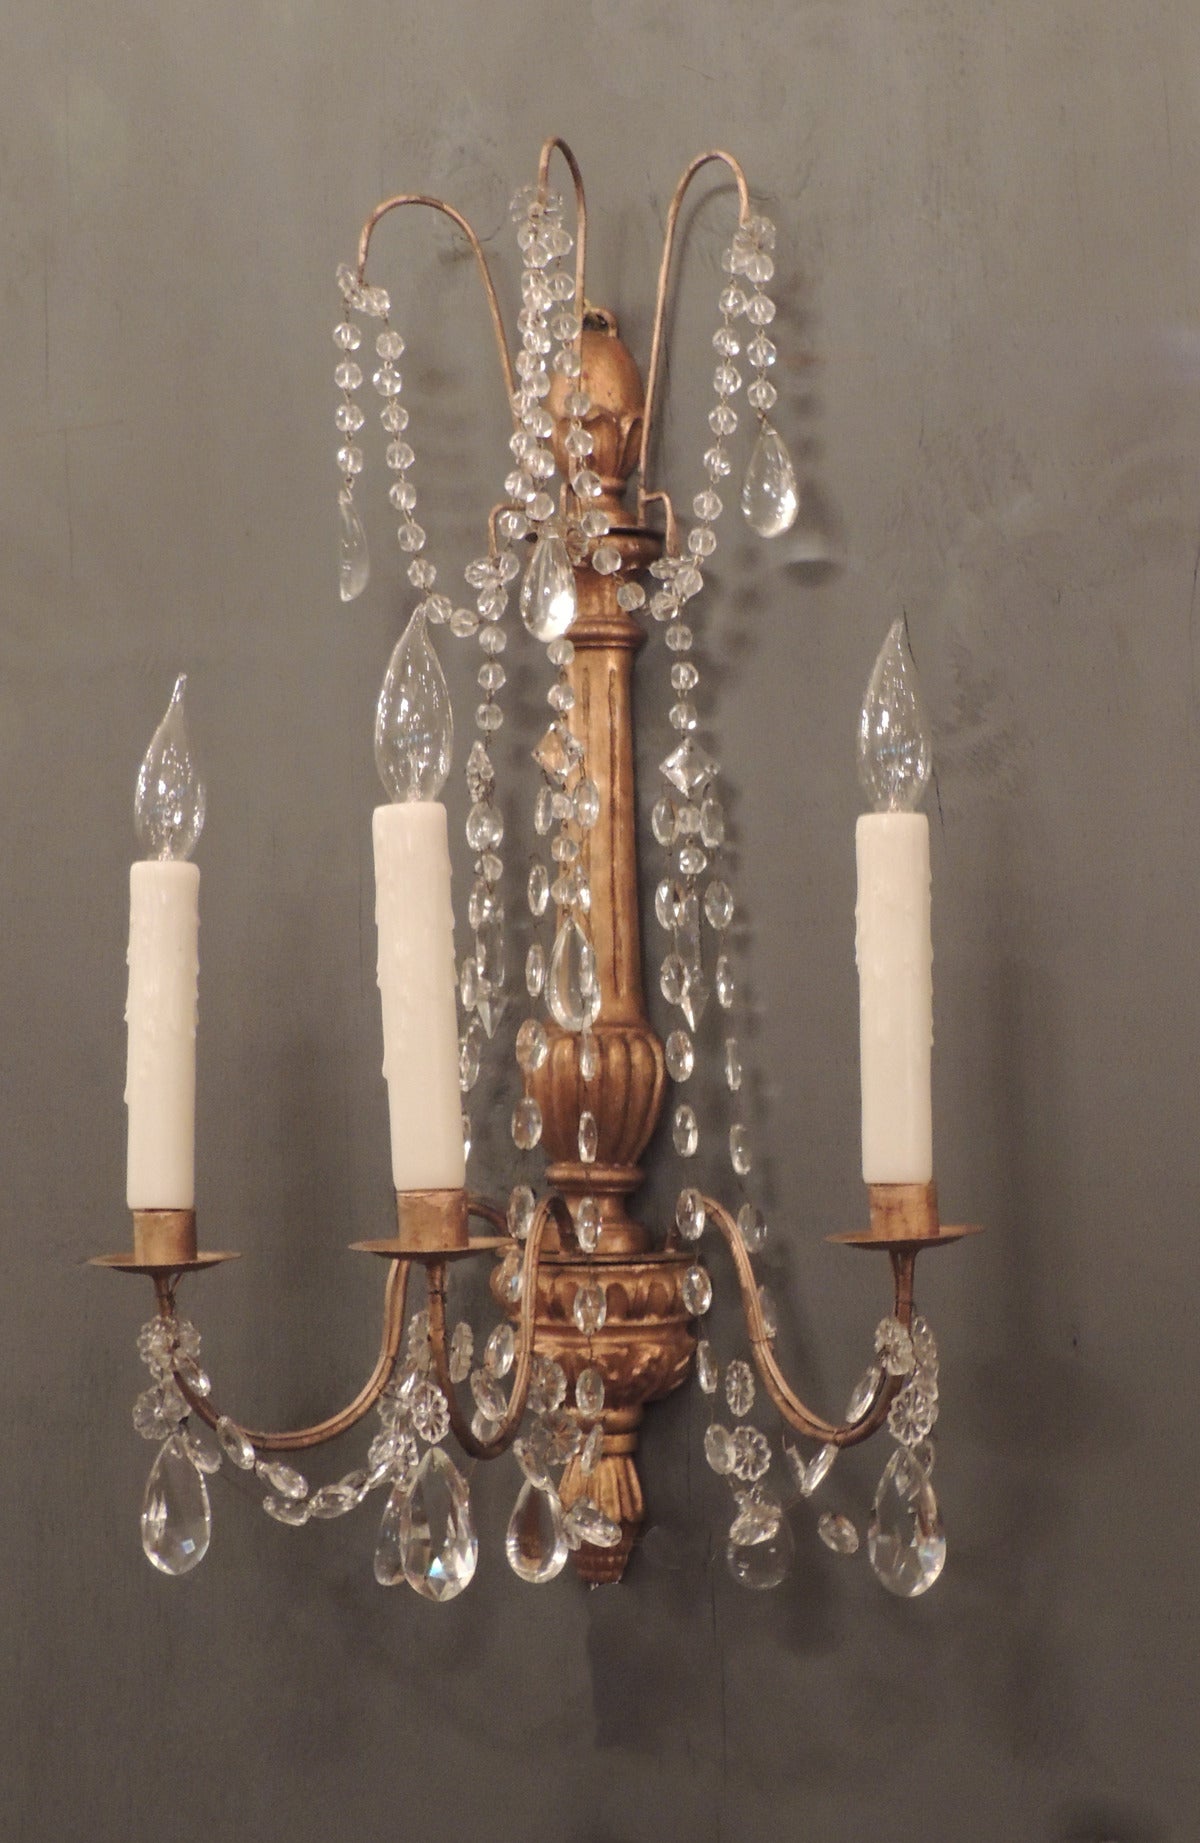 This pair of Genoese sconces were made Genoa, in Southern Italy, in the early-19th century. They feature a gilt carved stem with three candle arms, crystal swags and prisms, and an abstract corn finial. They have been rewired with new porcelain